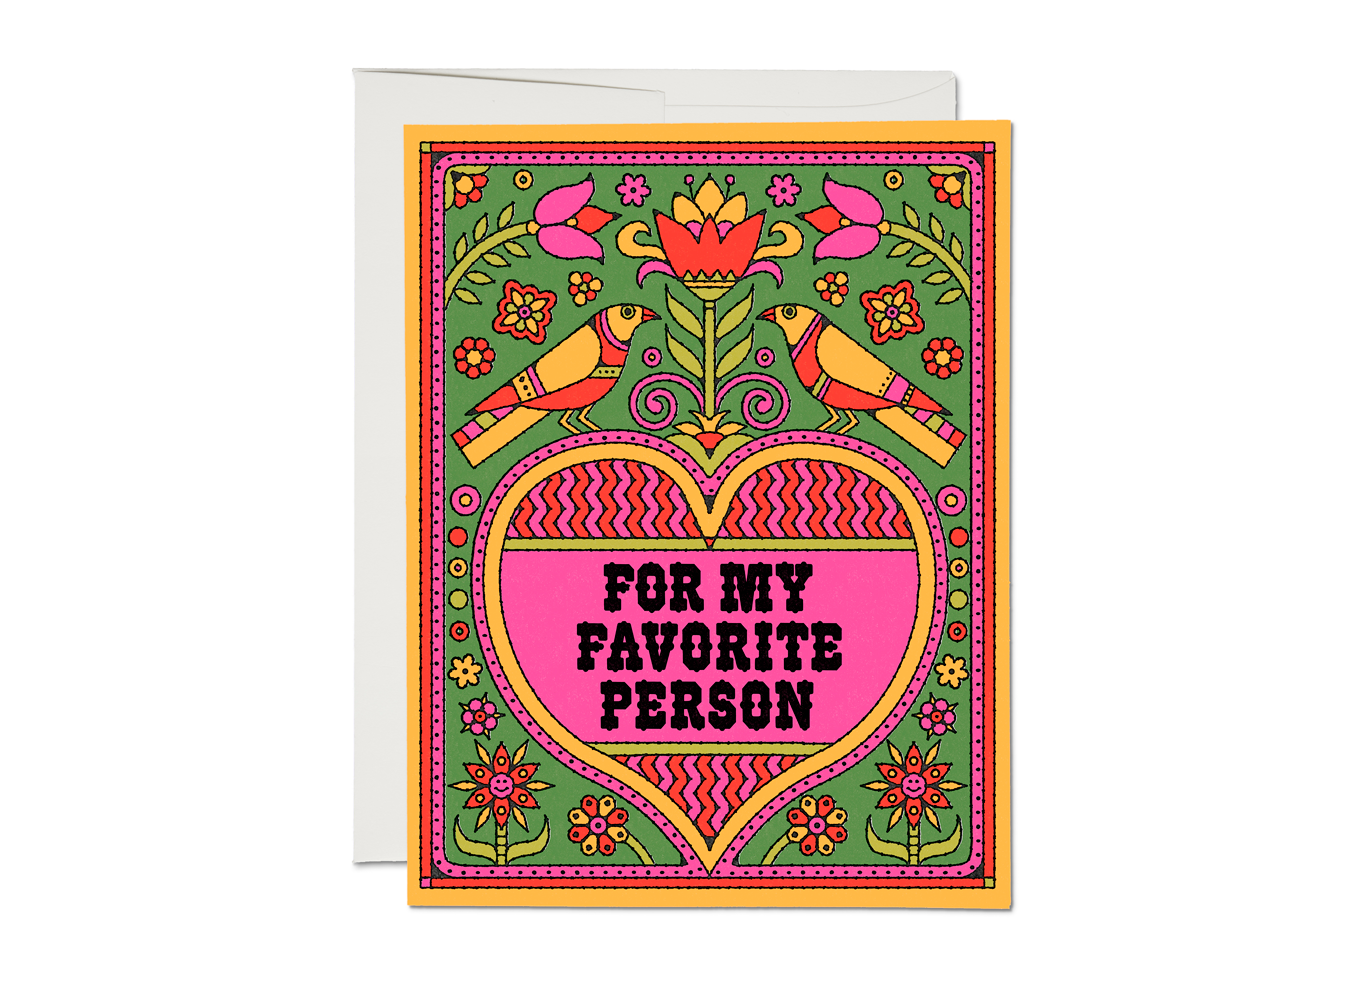 Favorite Person love greeting card - The Crowd Went Wild